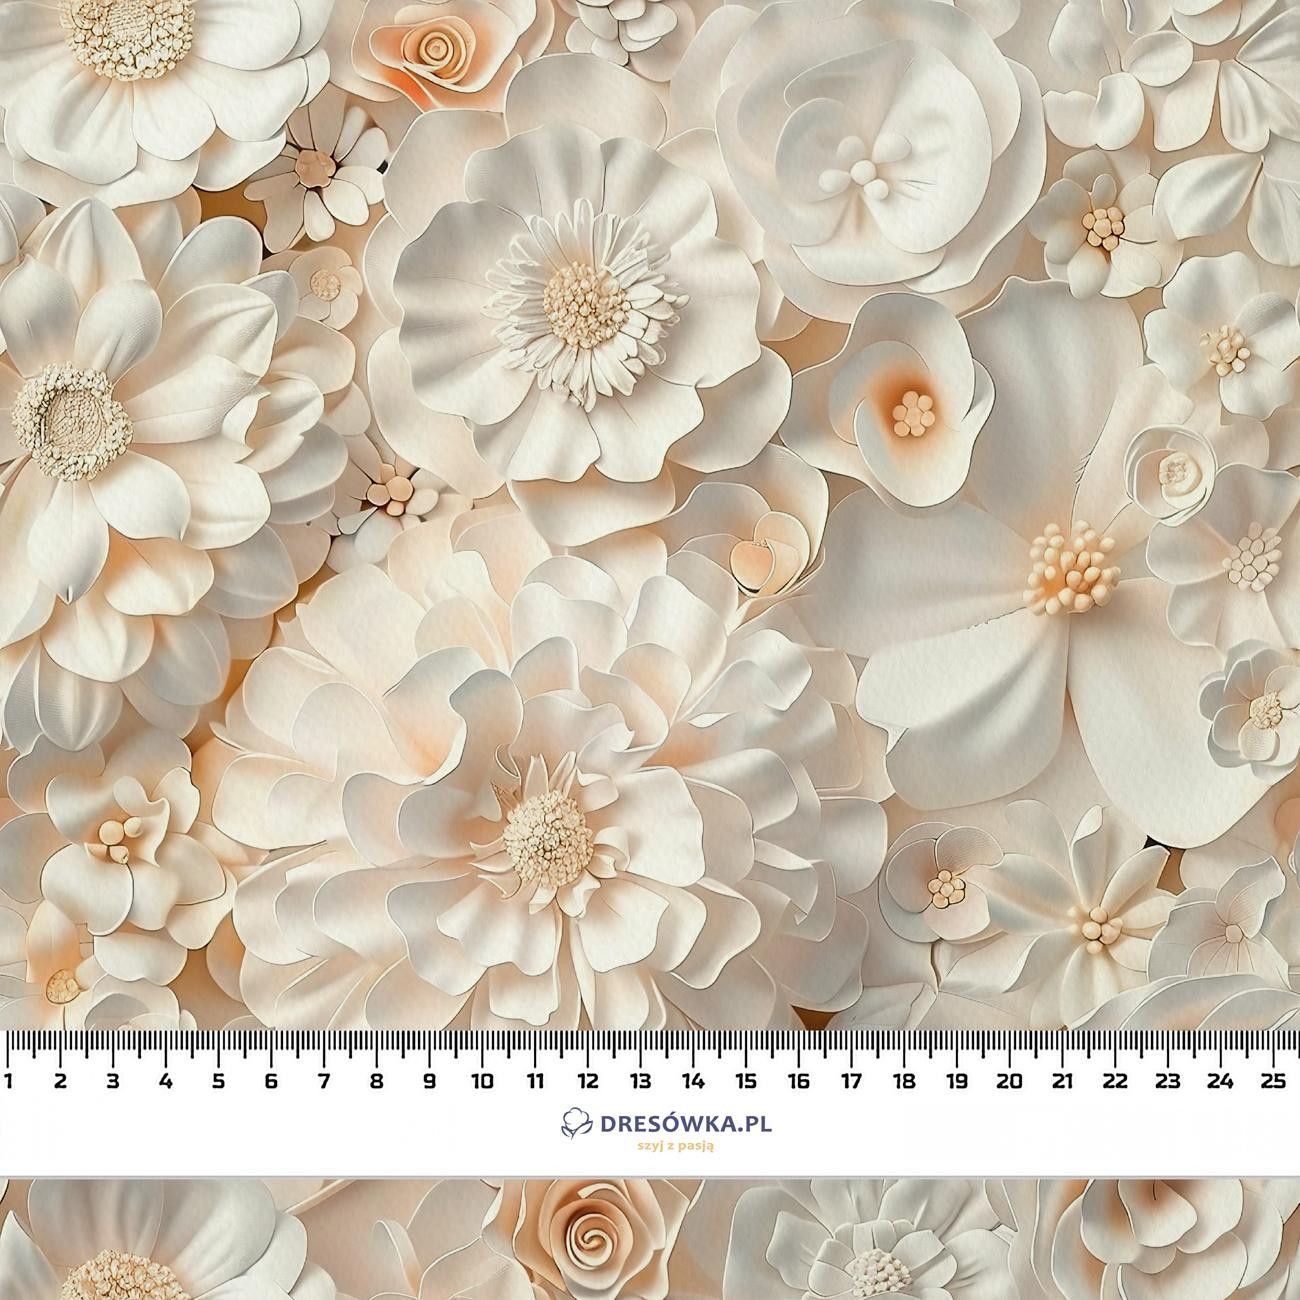 WHITE FLOWERS PAT. 4 - Cotton woven fabric